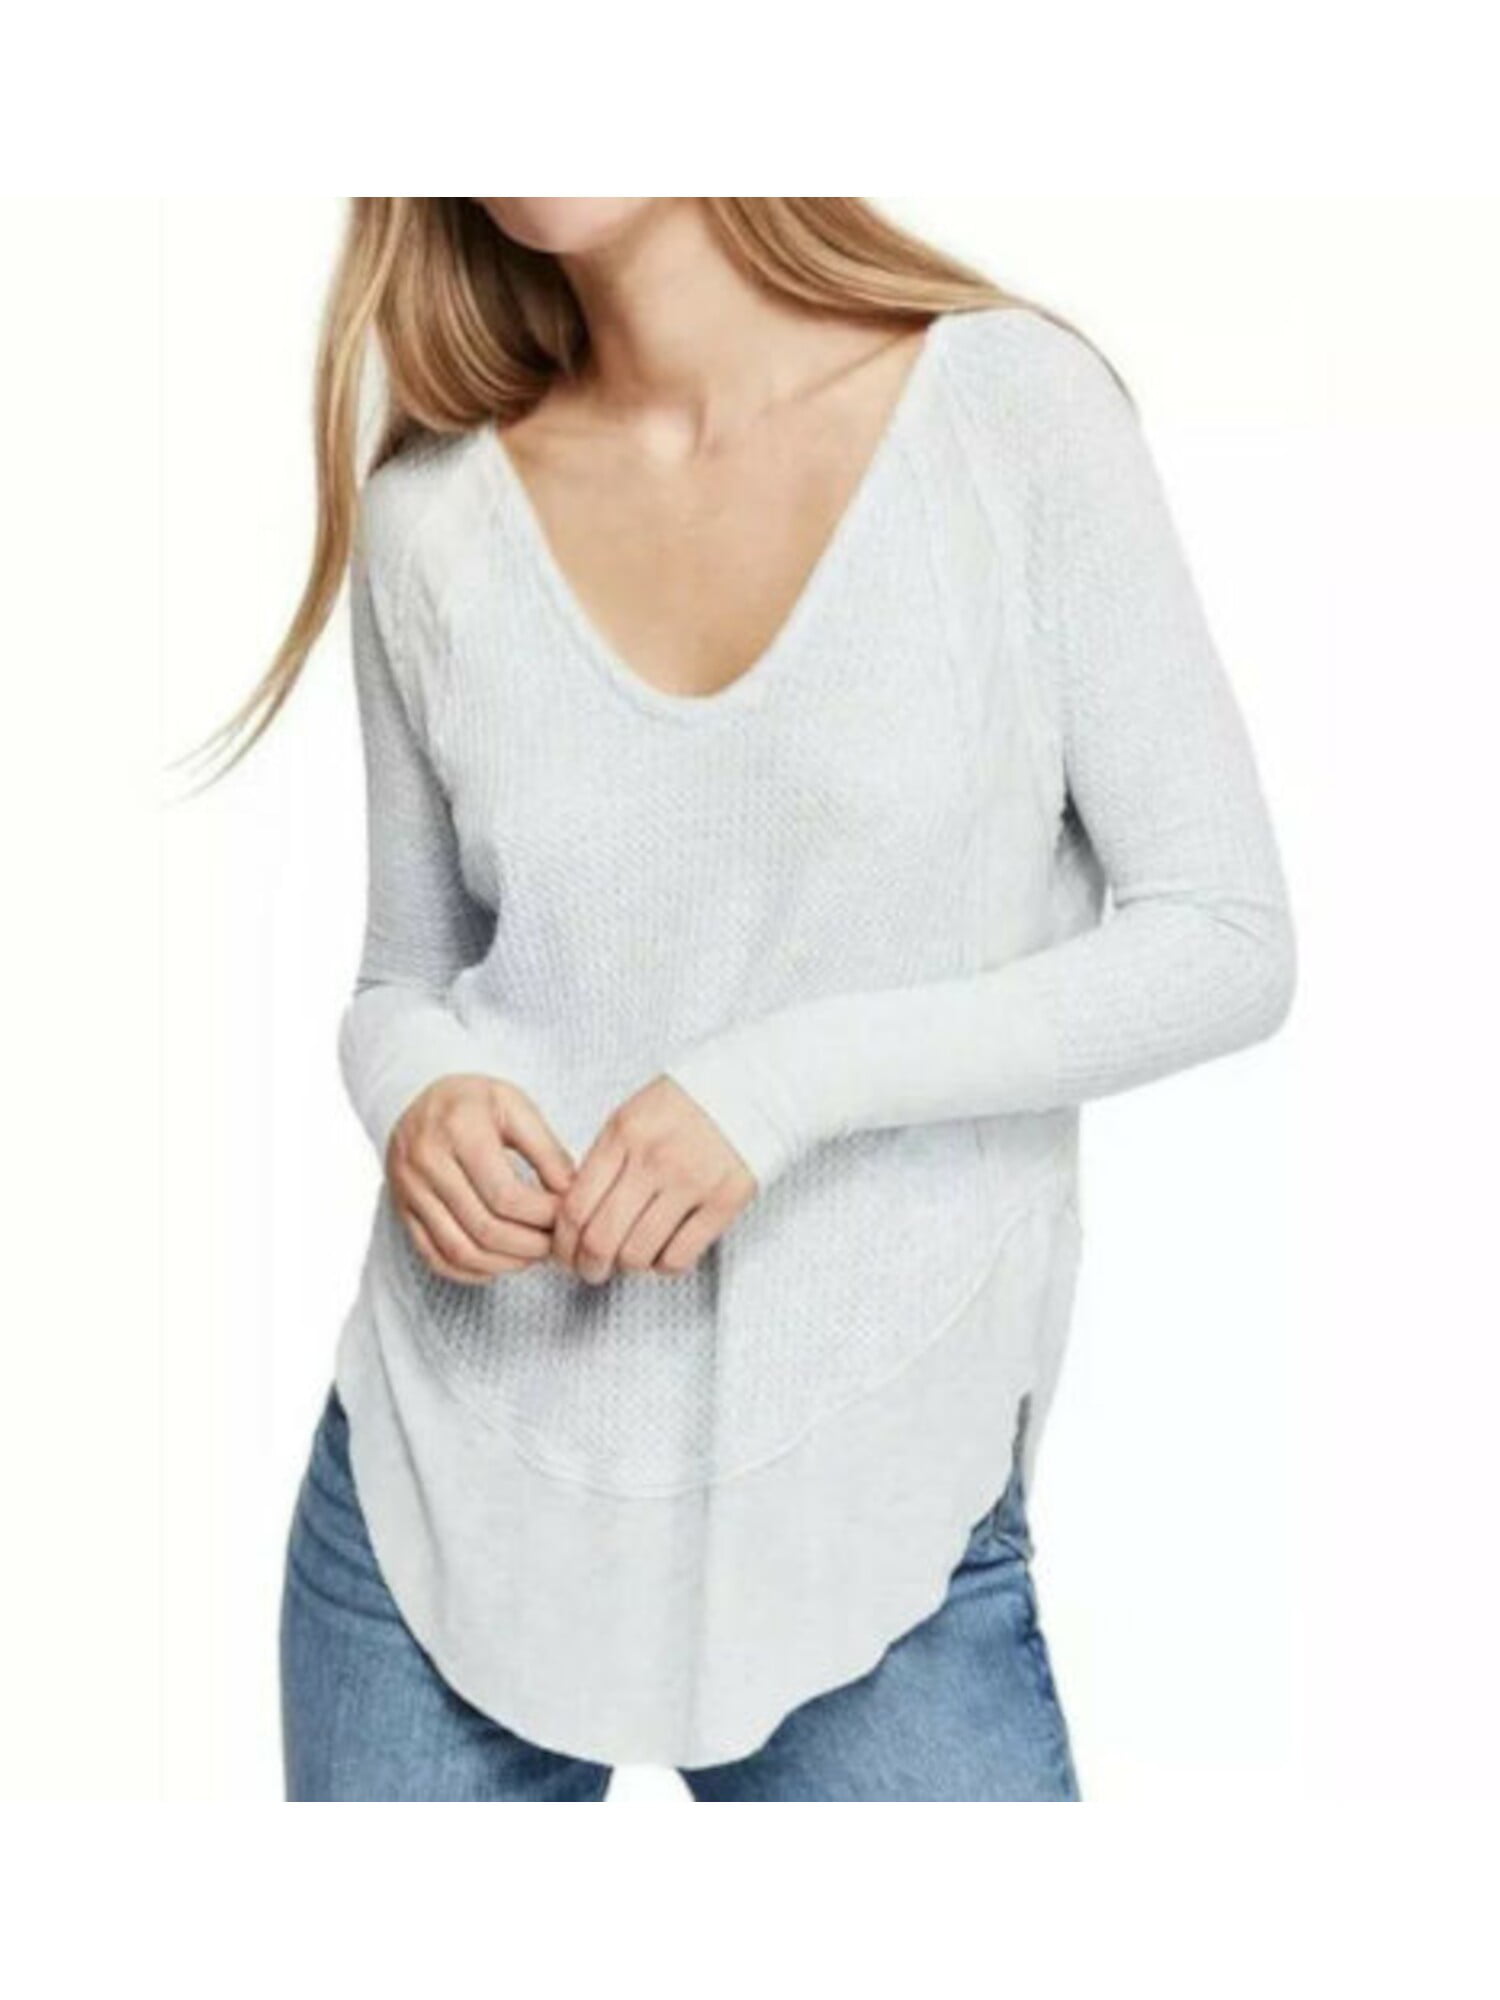 WE THE FREE PEOPLE Womens Waffle Knit Thermal Long Sleeve Shirt S